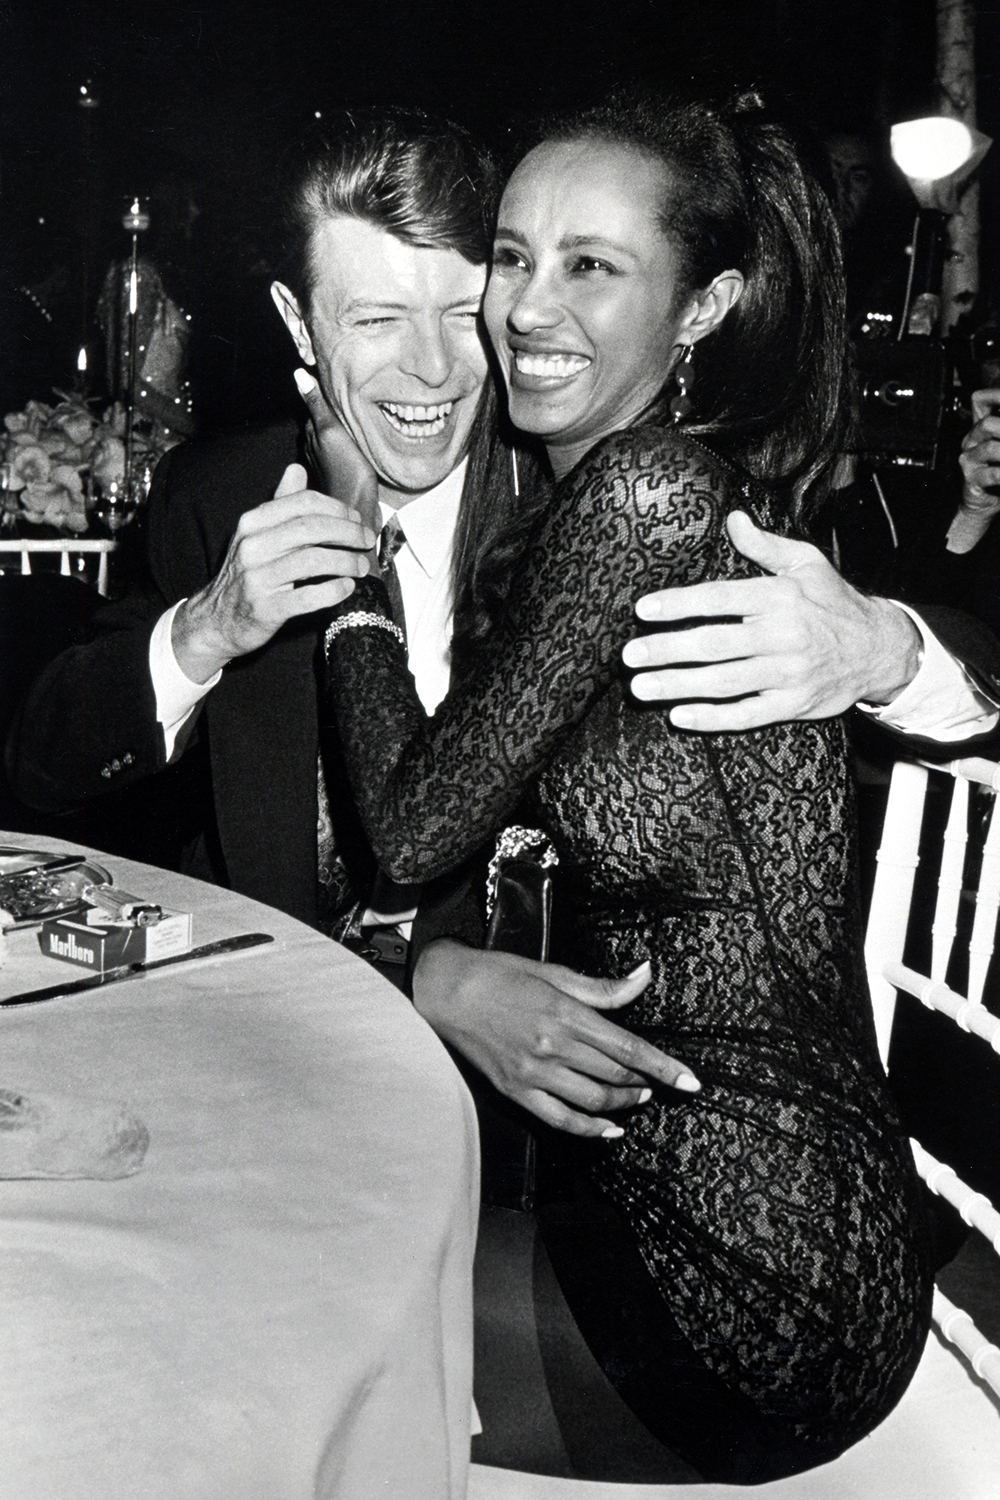 David Bowie married model Iman in a private ceremony in Switzerland in 1992. The couple have one daughter, Alexandria, who was born in 2000.